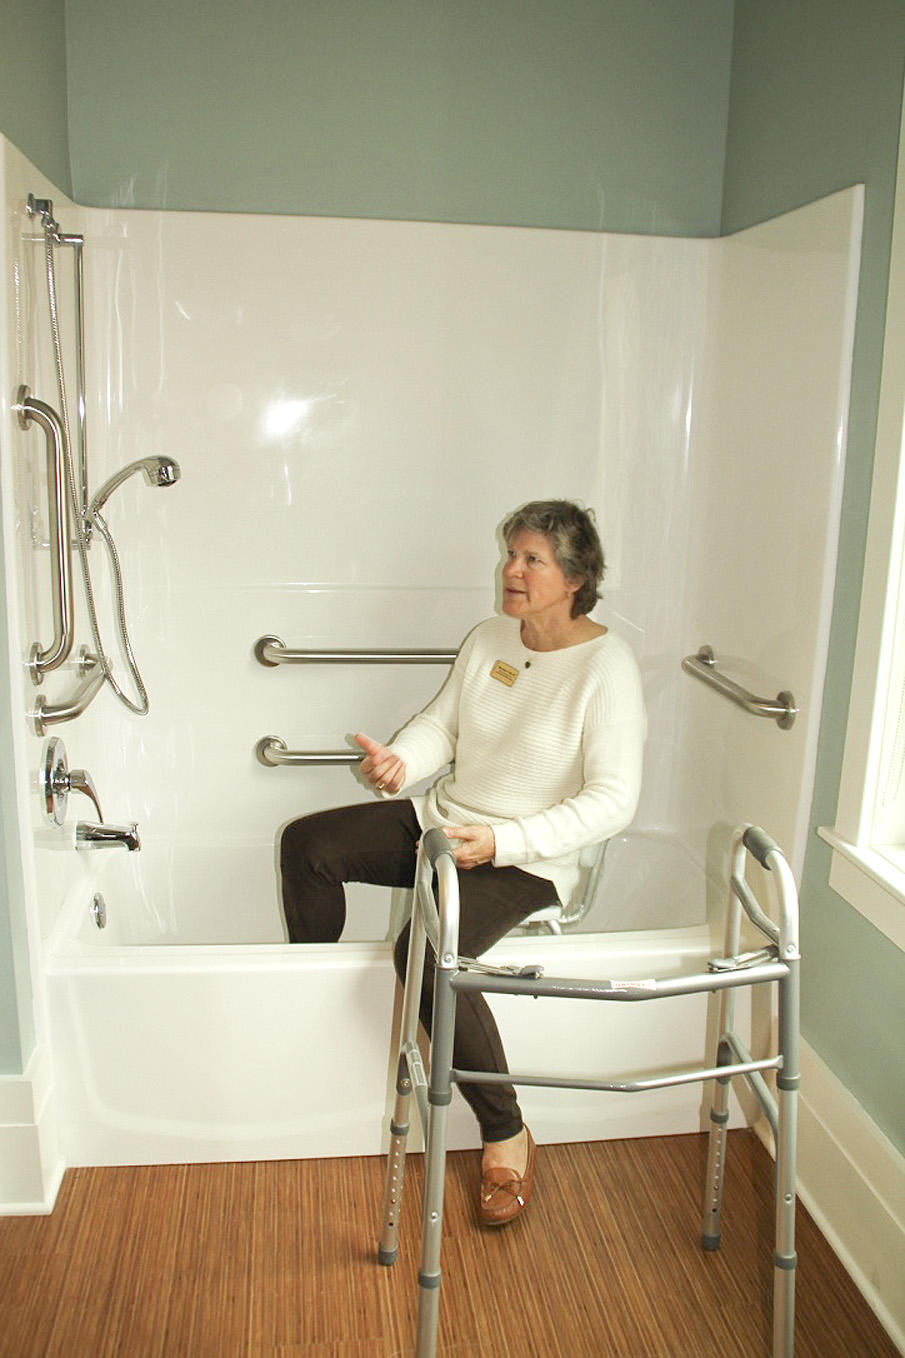 Instructor Kathleen Schaefer teaches caregivers how to assists loved ones in and out of the bathtub.